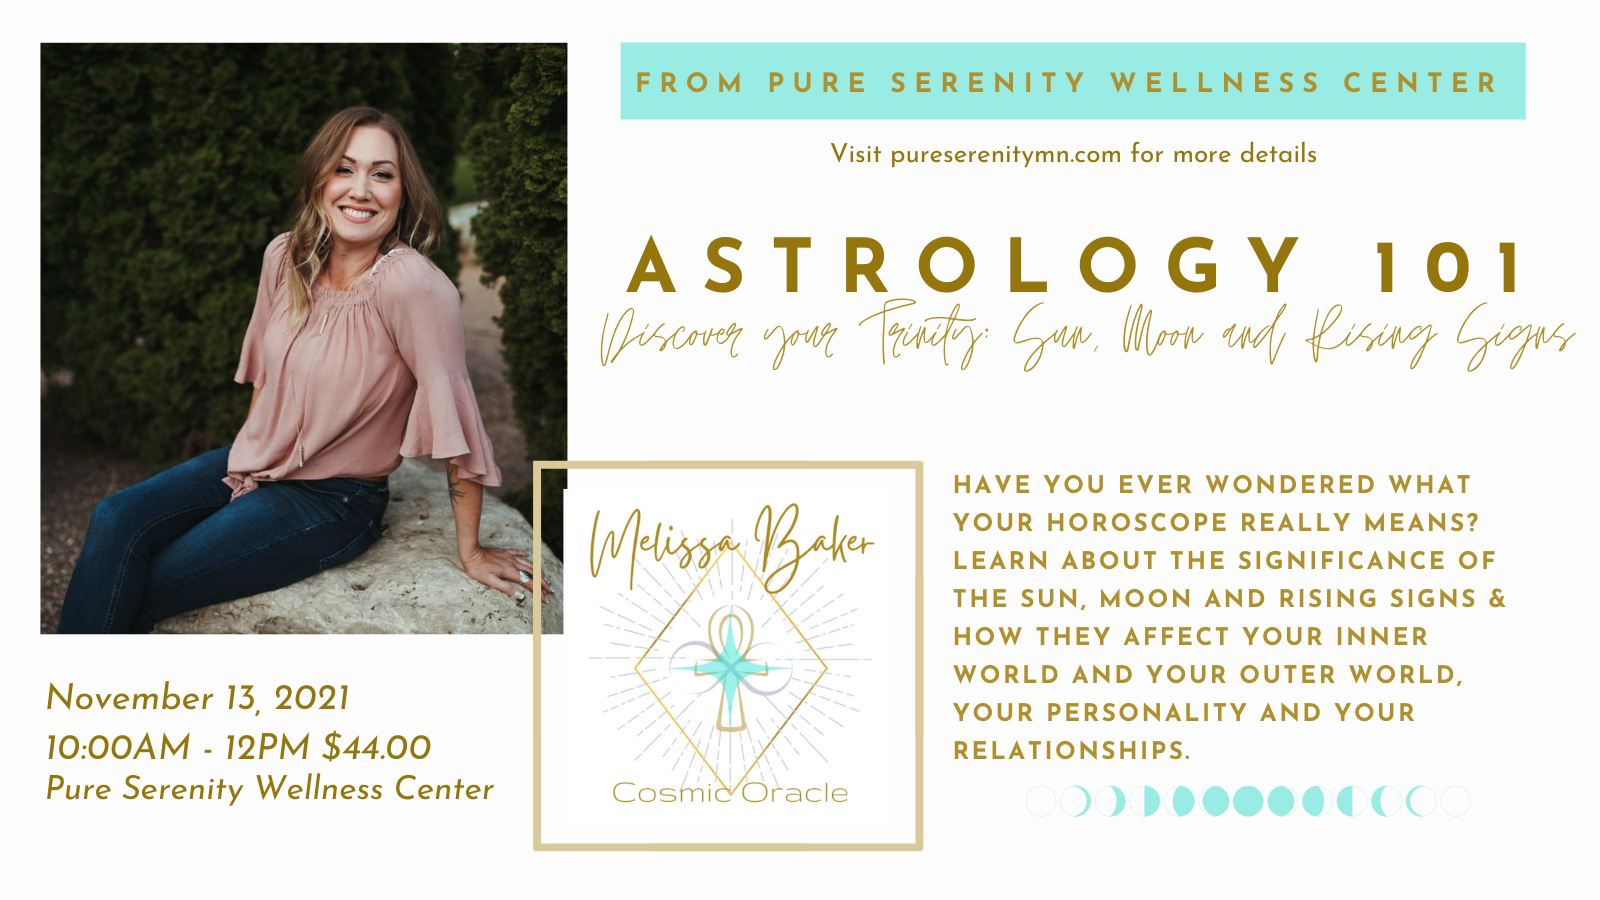 Astrology 101 with Melissa Baker at Pure Serenity Wellness Center